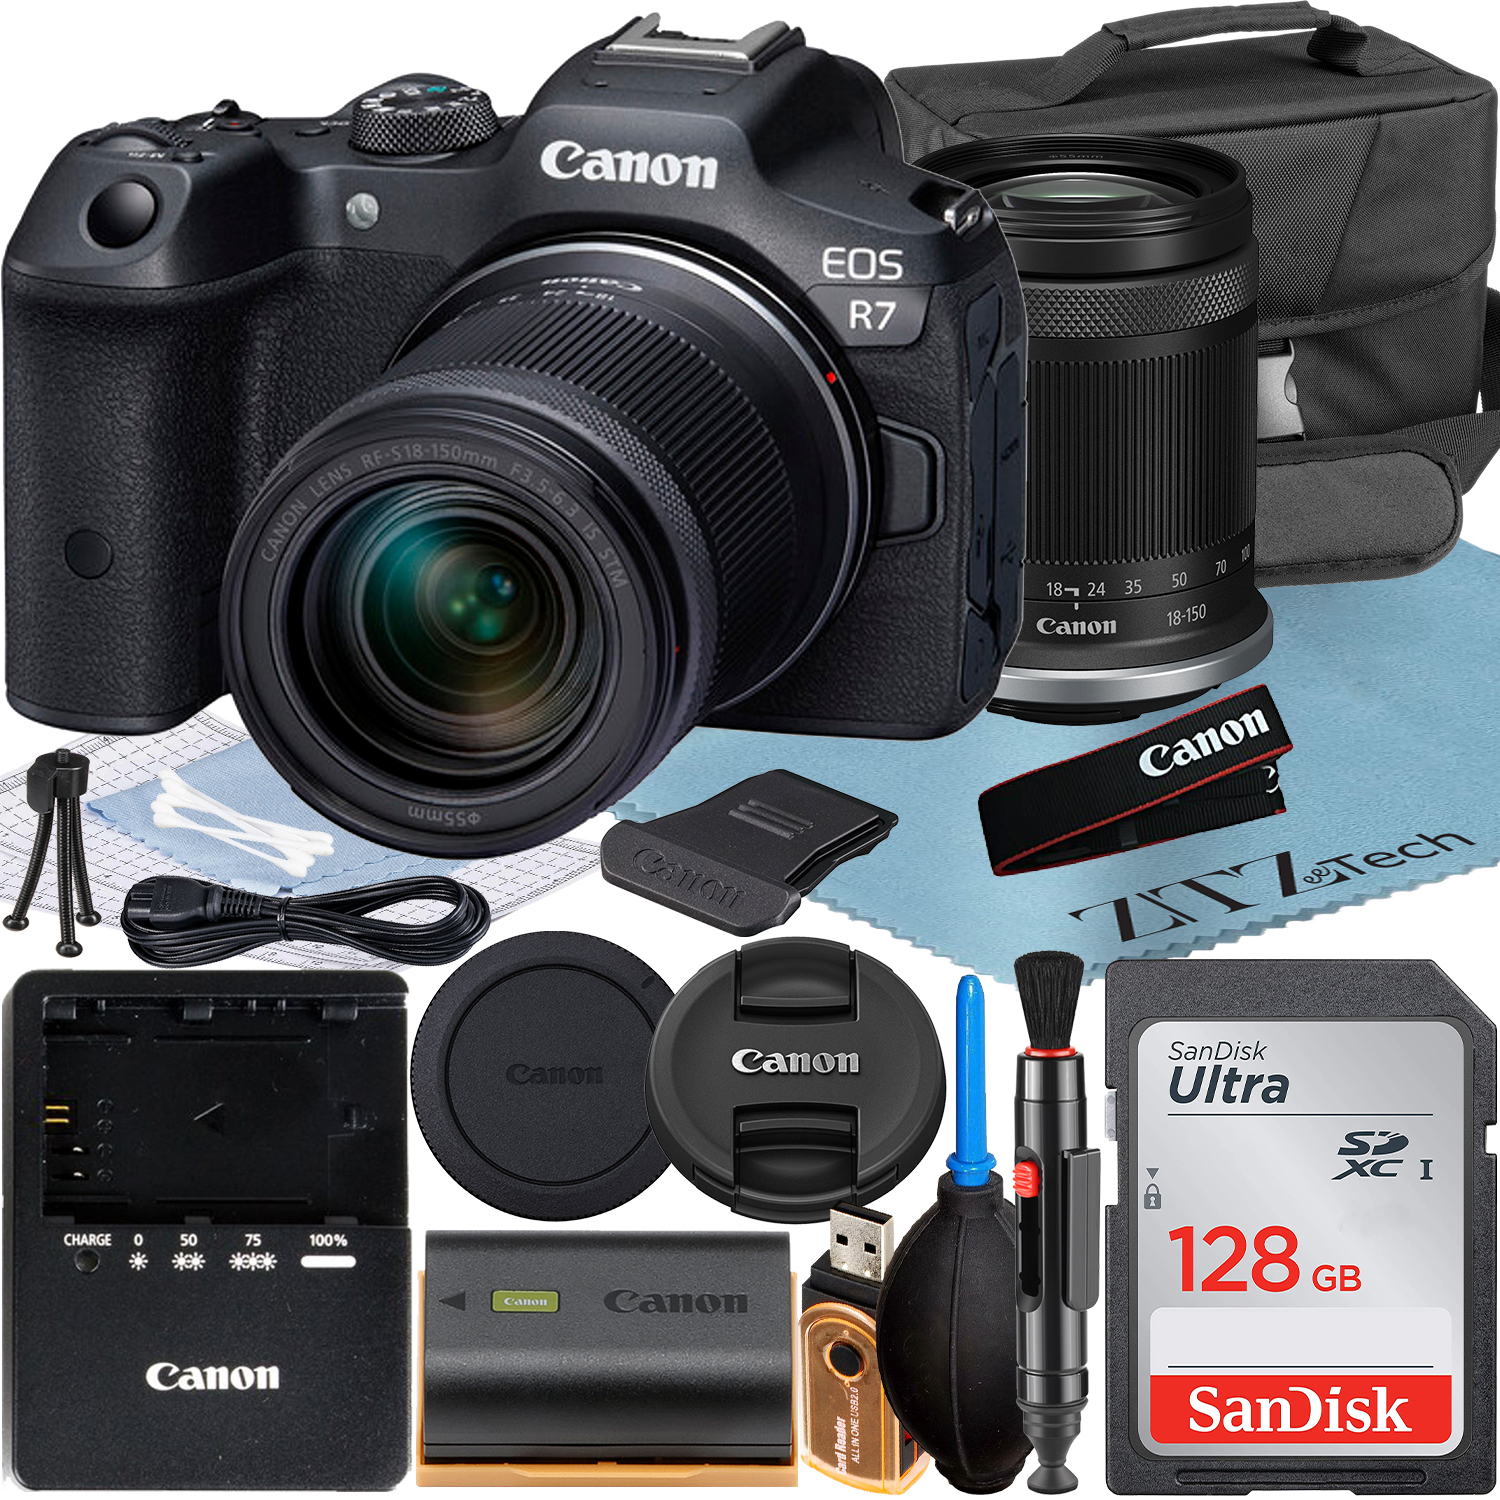 Canon EOS R7 Mirrorless Camera with RF-S 18-150mm Lens + SanDisk 128GB Memory Card + Case + ZeeTech Accessory Bundle